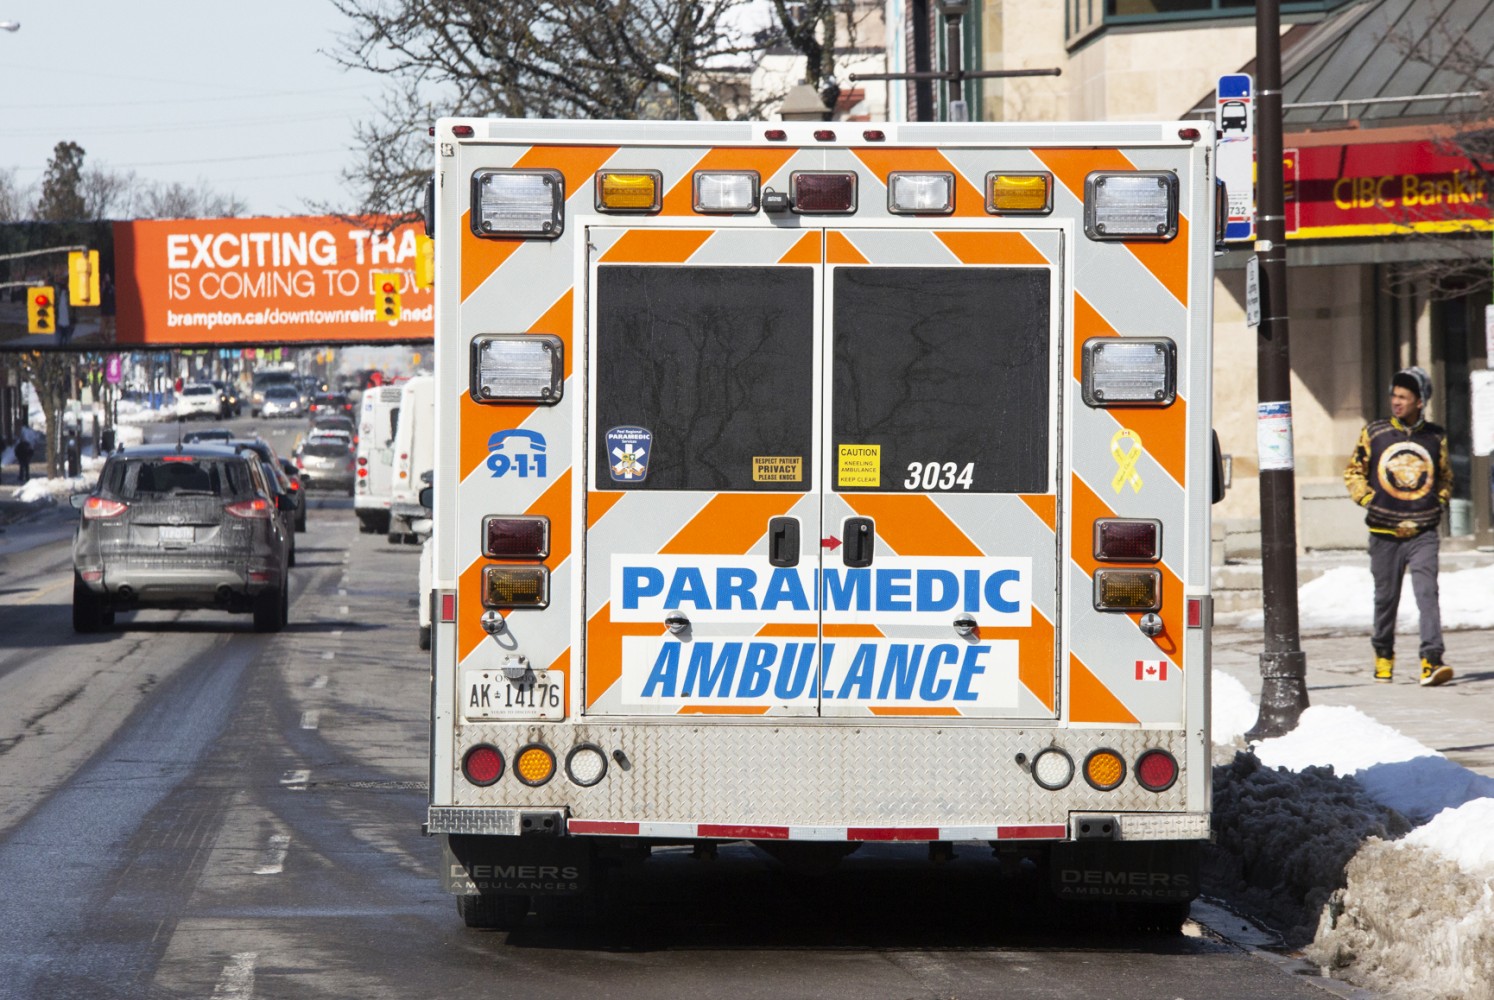 Facing scrutiny, province tables changes to safety standards to accommodate Sikh paramedics